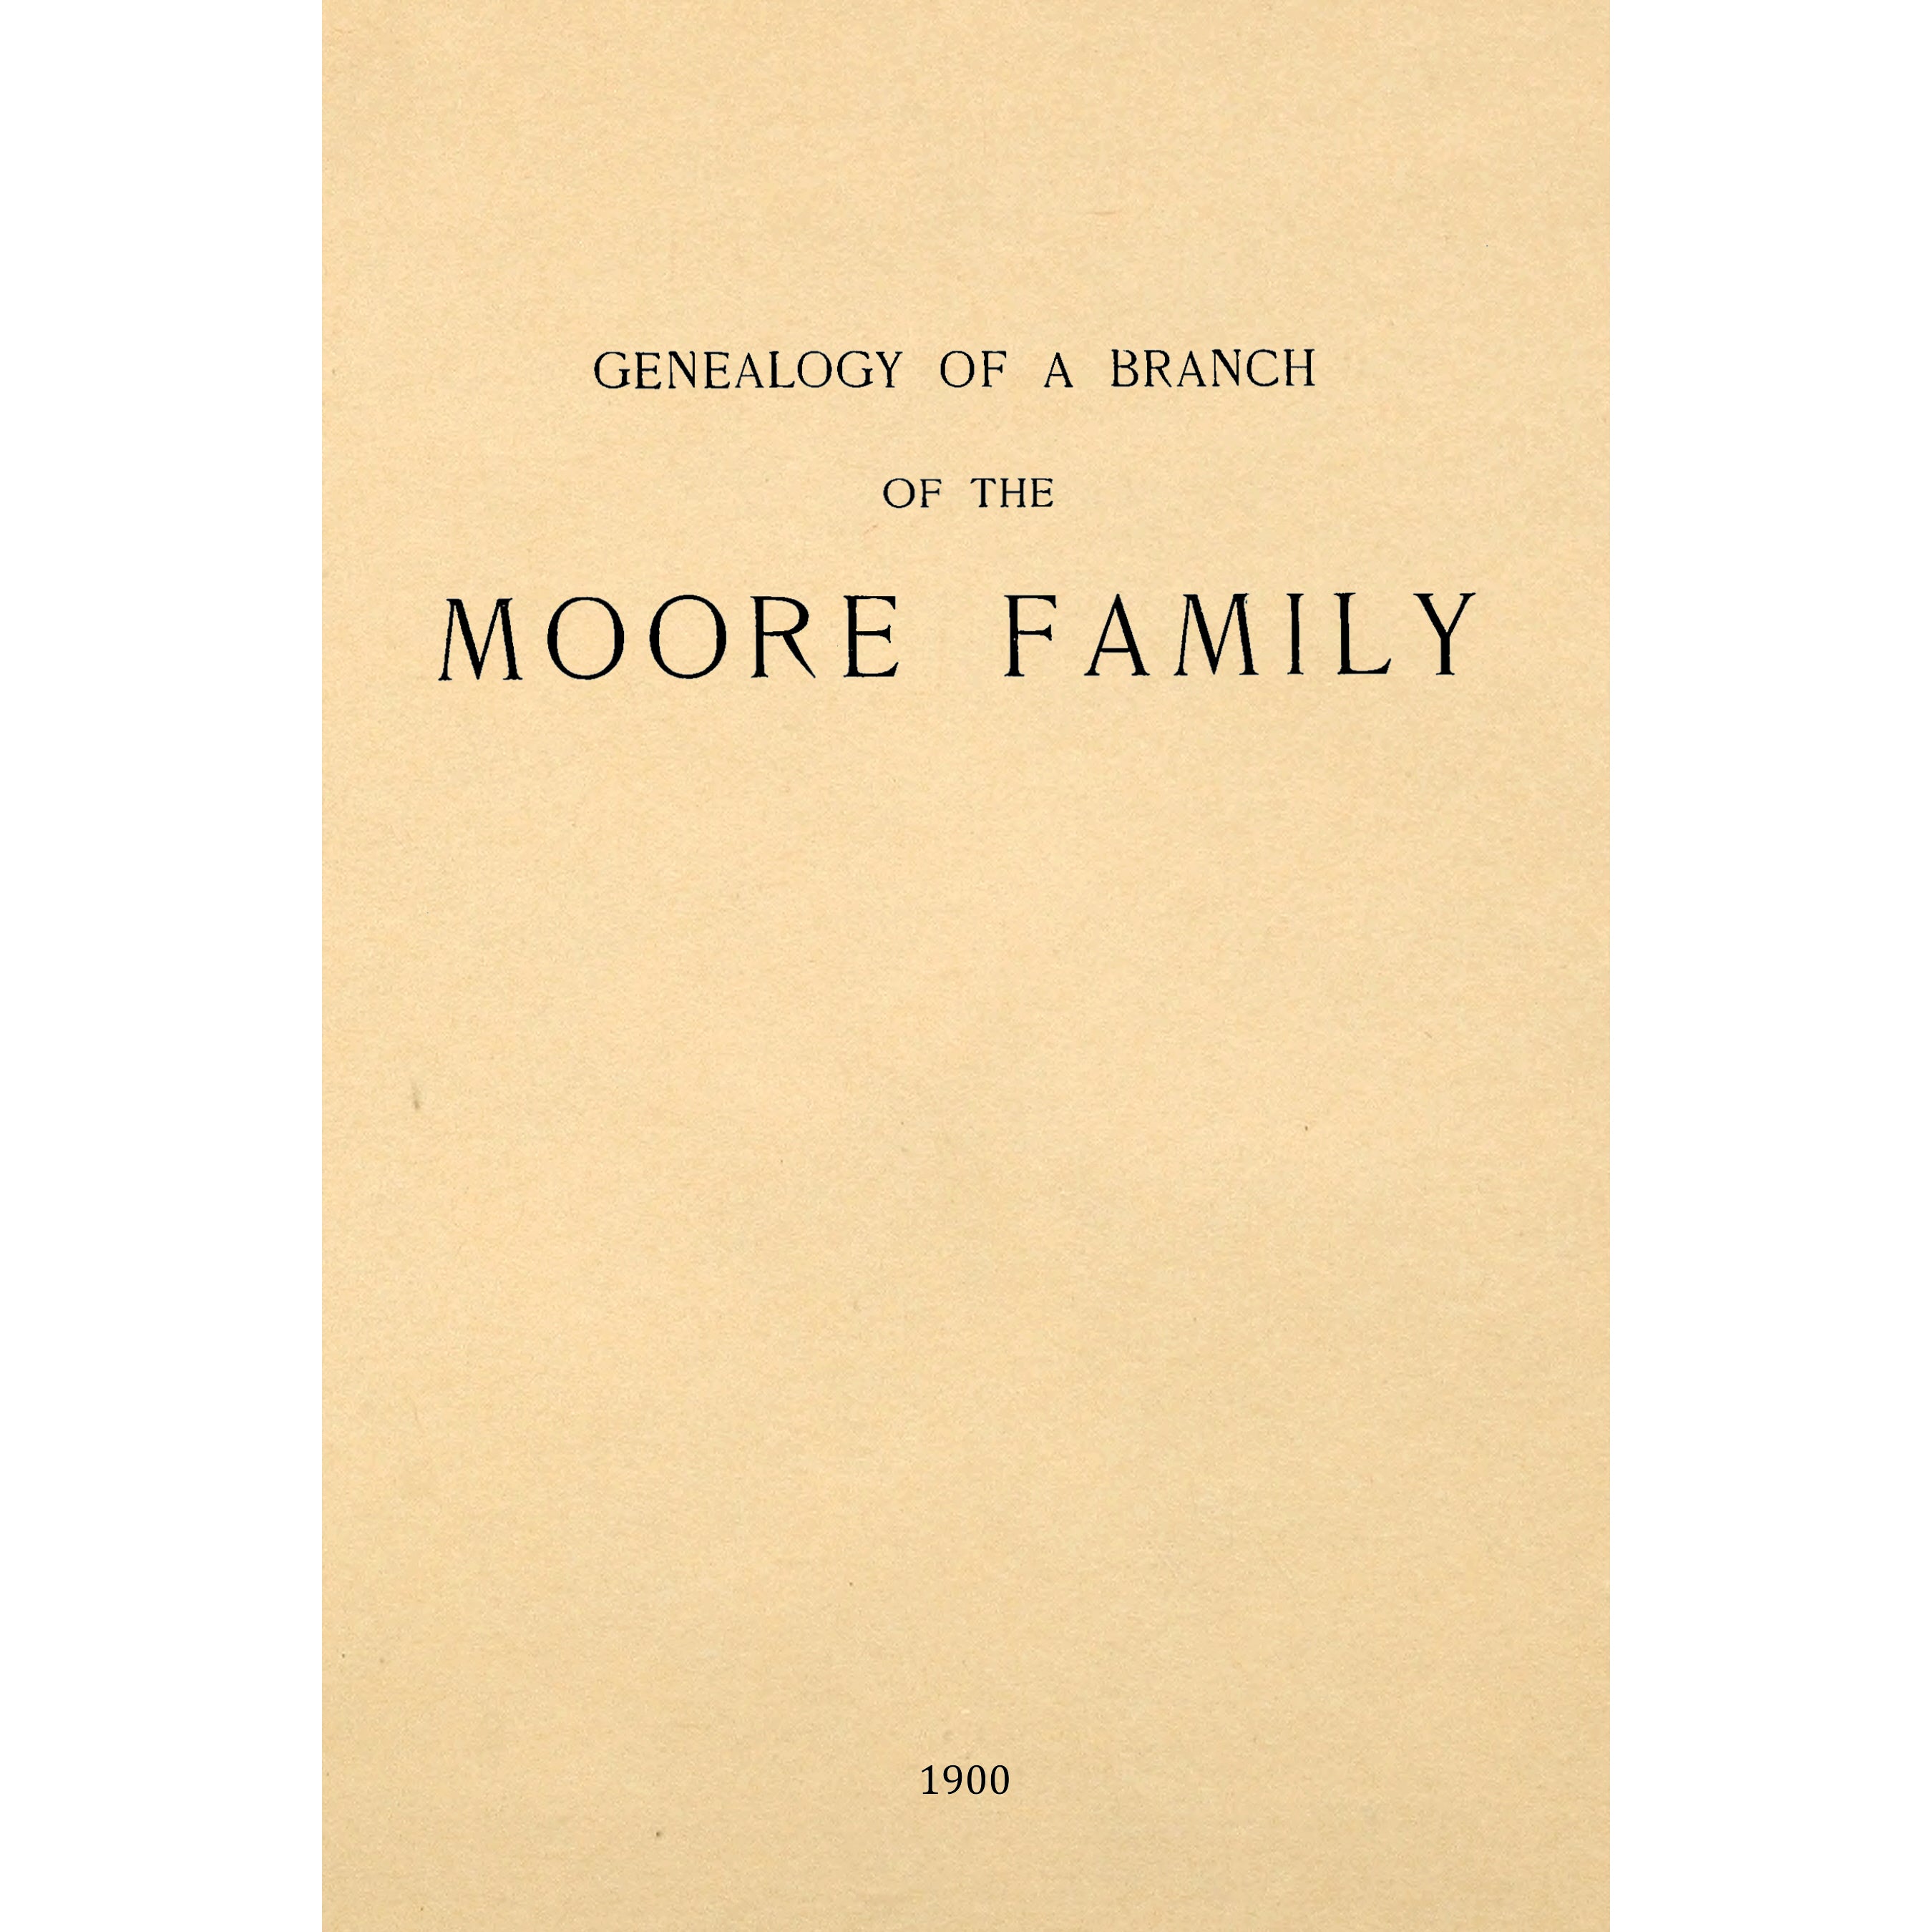 Genealogy of a branch of the Moore family; descendants of Deacon John Moore of Windsor, CT